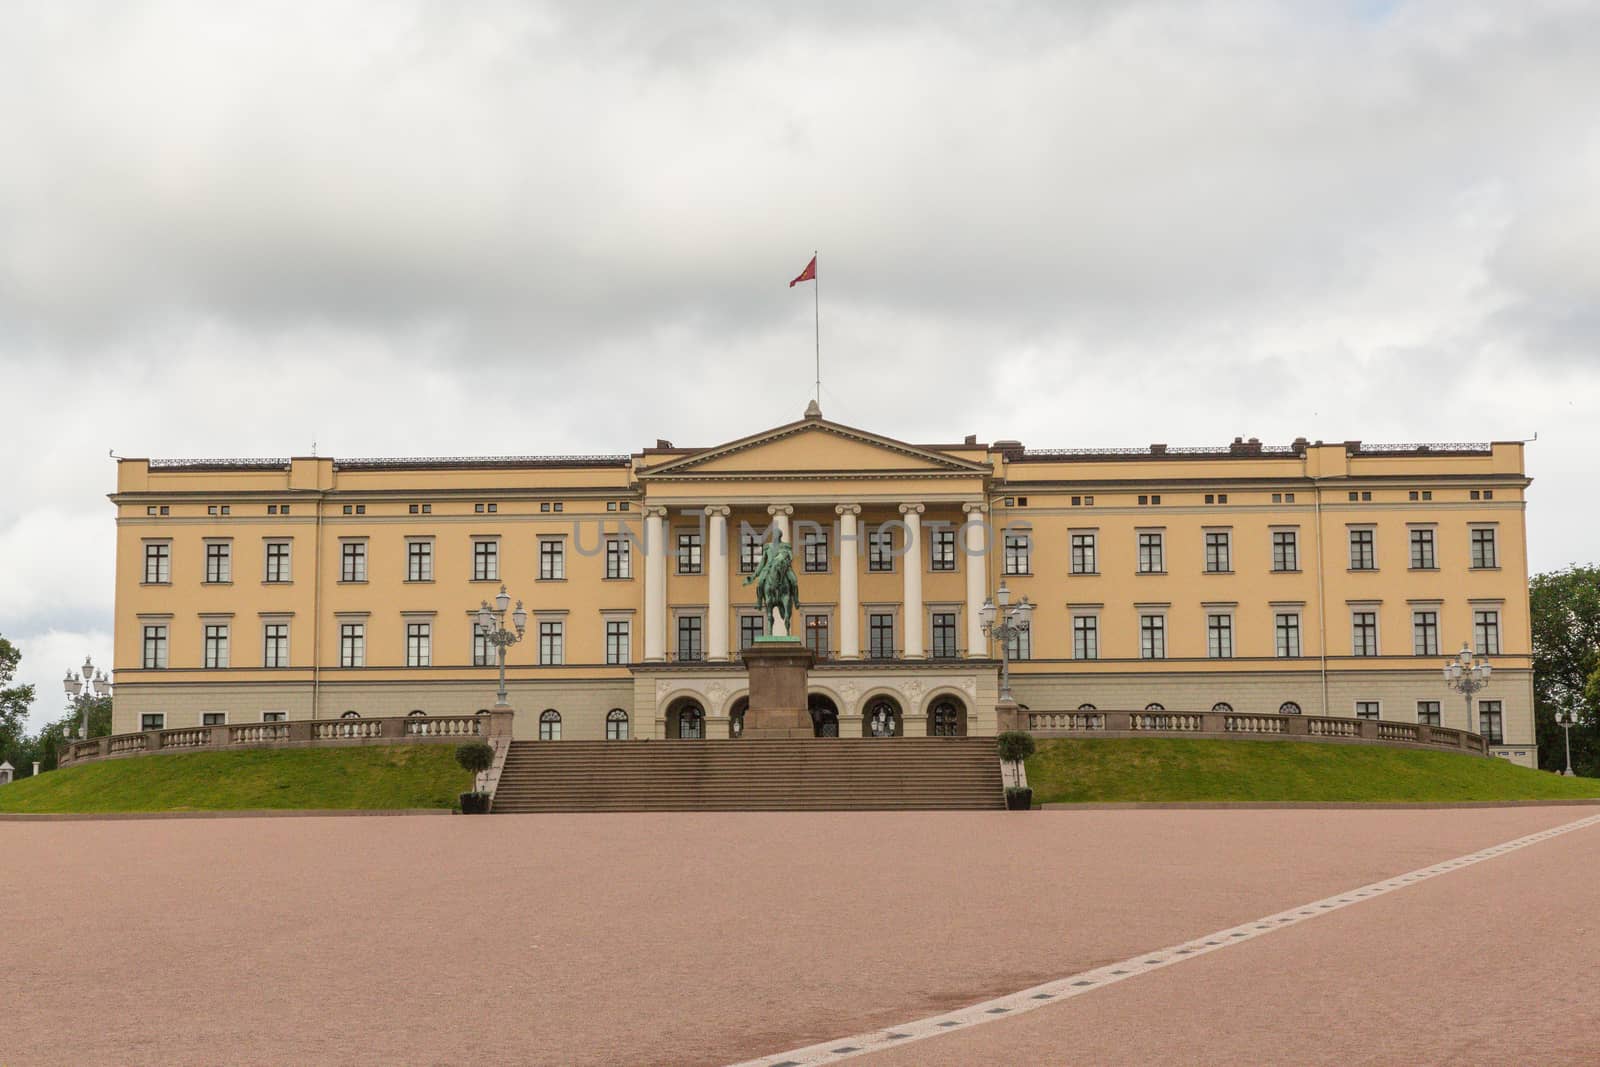 The Royal Palace in Oslo by chrisukphoto